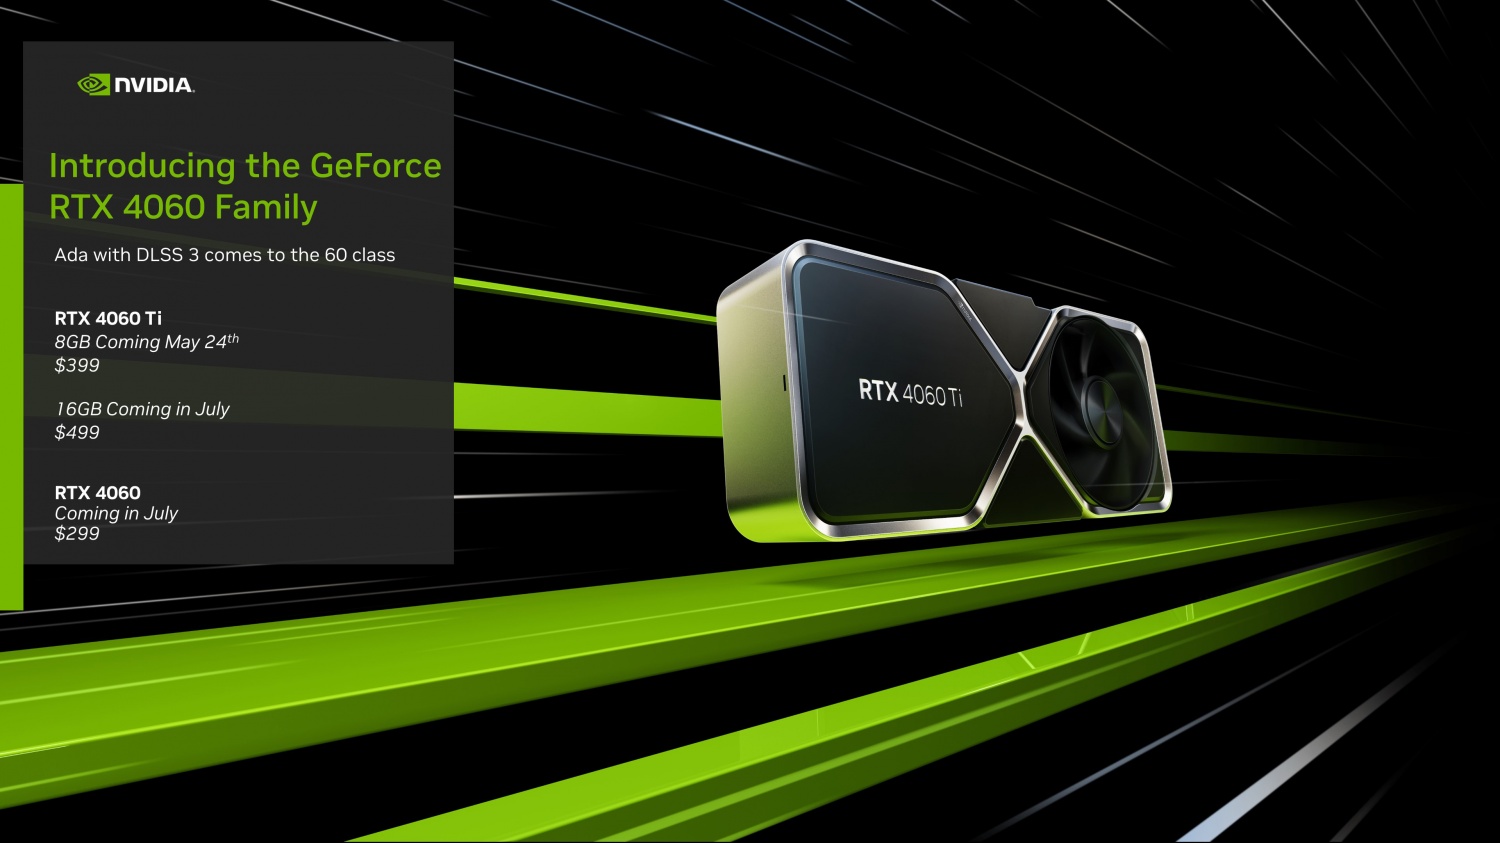 NVIDIA GeForce RTX 4060 Launch Date Revealed: It Is Earlier Than Previously Announced